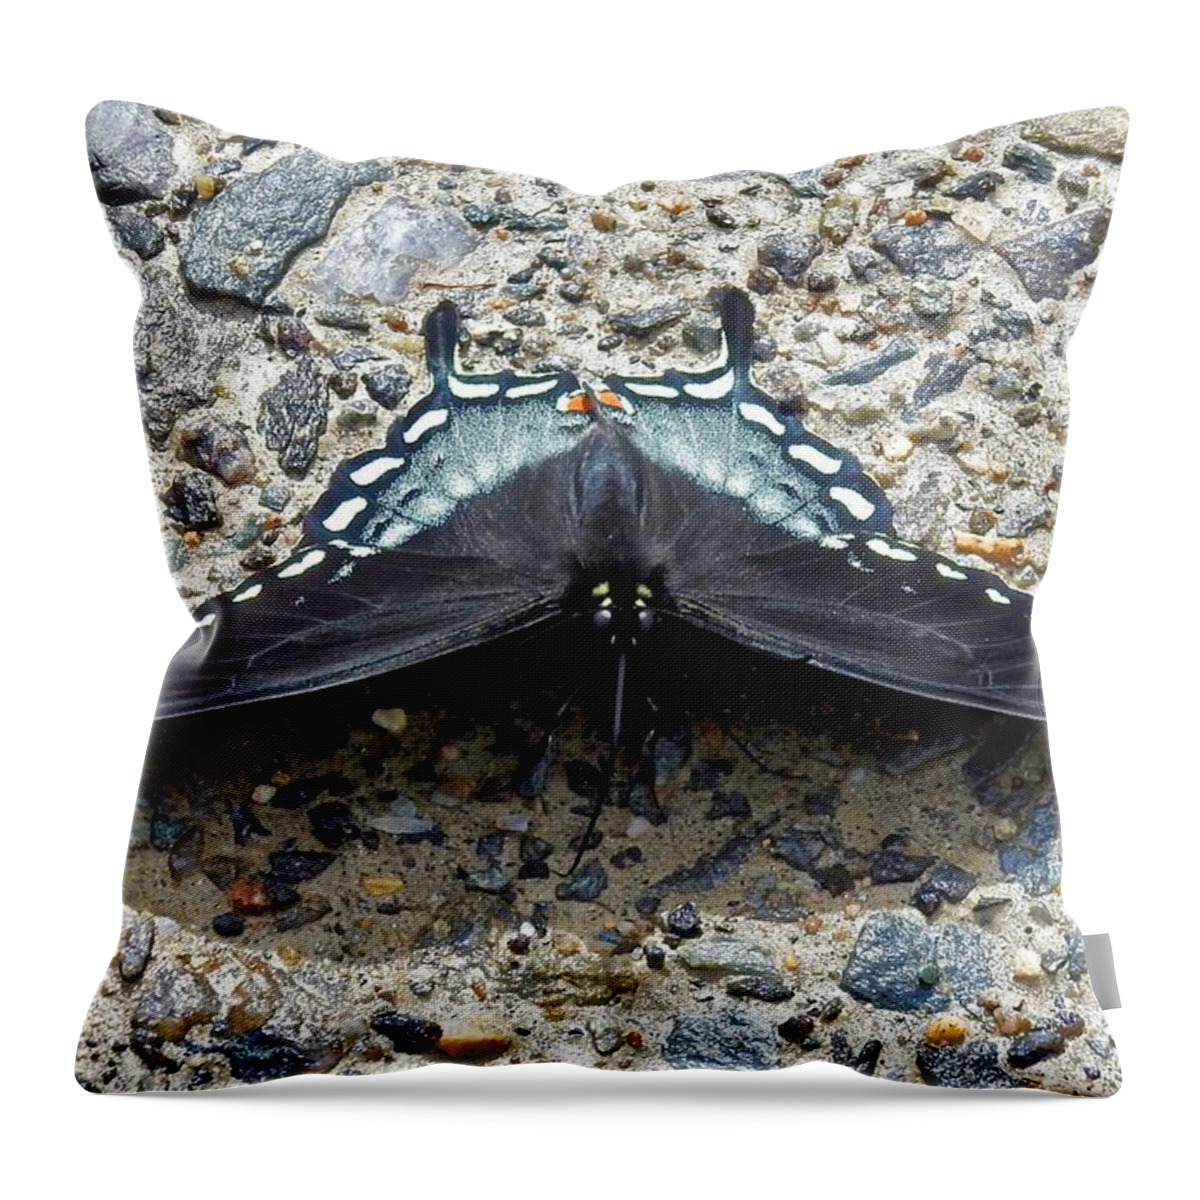 Blue Throw Pillow featuring the photograph Ready For Takeoff by Kathy Chism